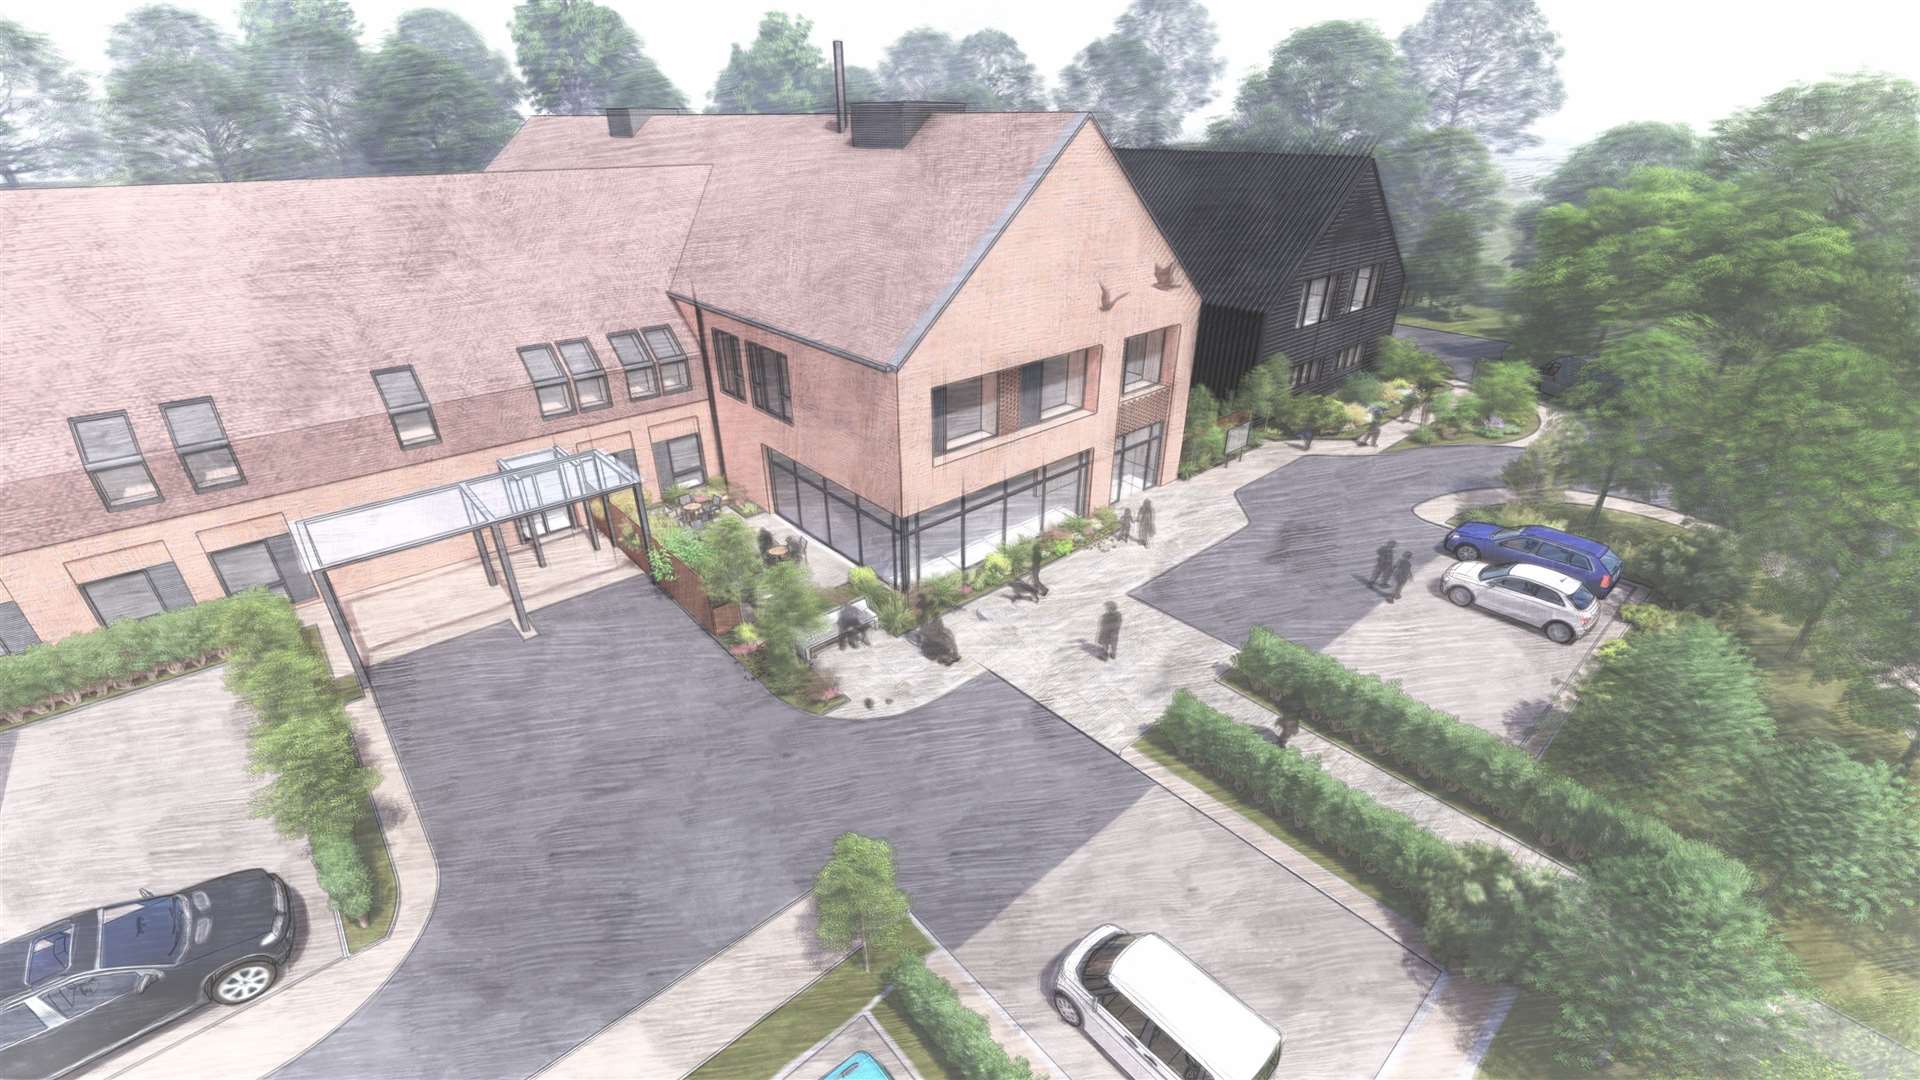 Sketches of the proposed hospice building